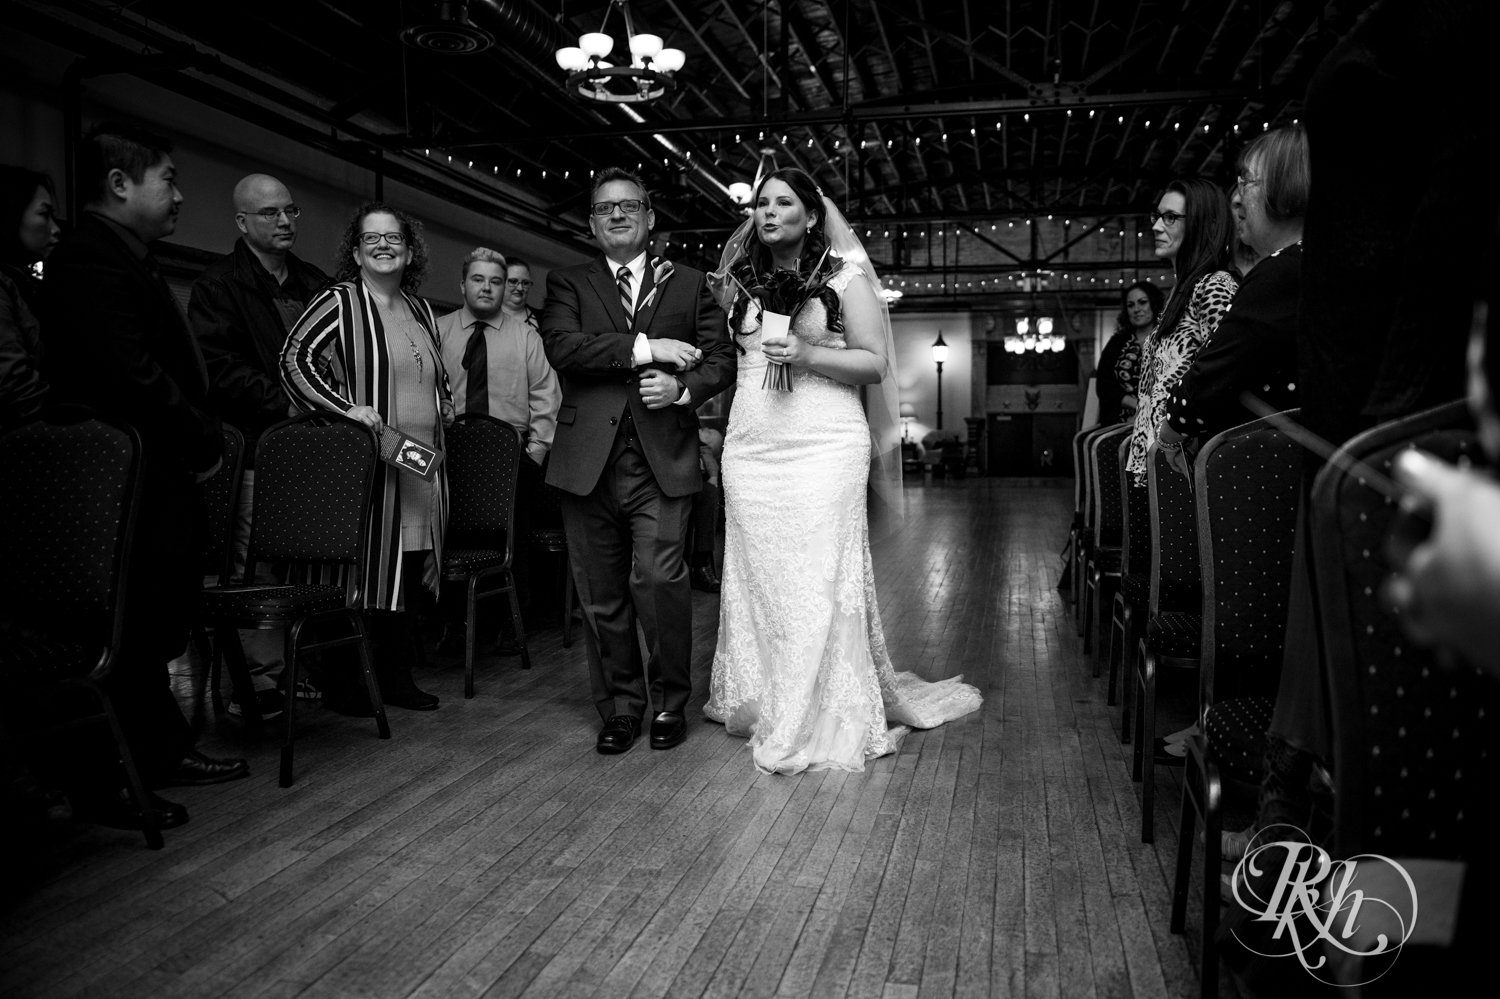 Bride walks down the aisle with dad at Kellerman's Event Center in White Bear Lake, Minnesota.